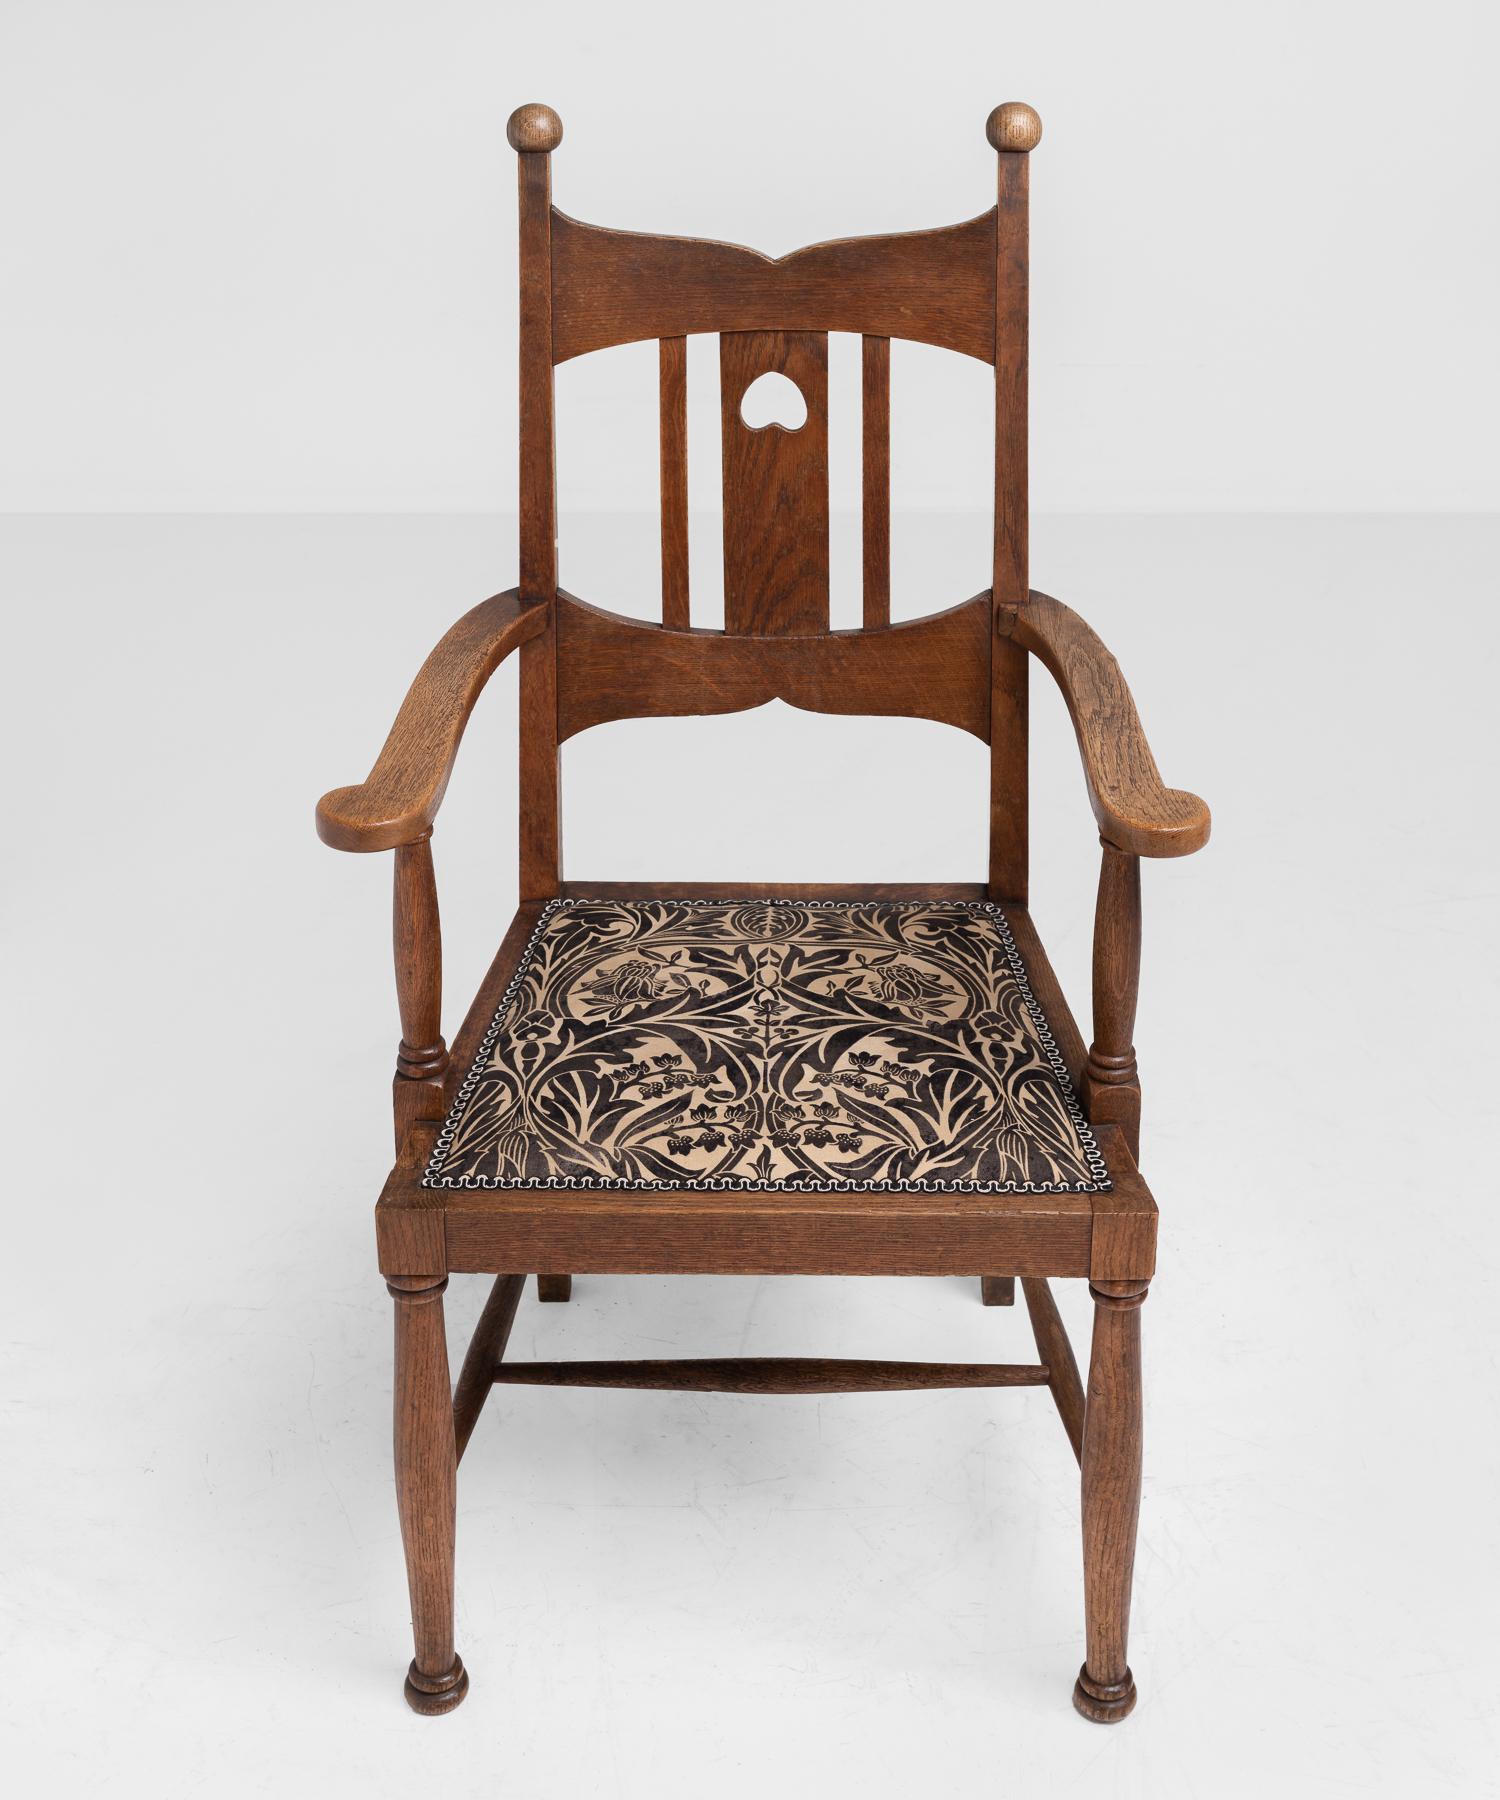 Set of (6) Arts & Crafts oak dining chairs, England, circa 1900.

Highback oak dining chairs in the manner of Liberty & Co. with upholstered seat in the style of William Morris.

Measures: 18.5